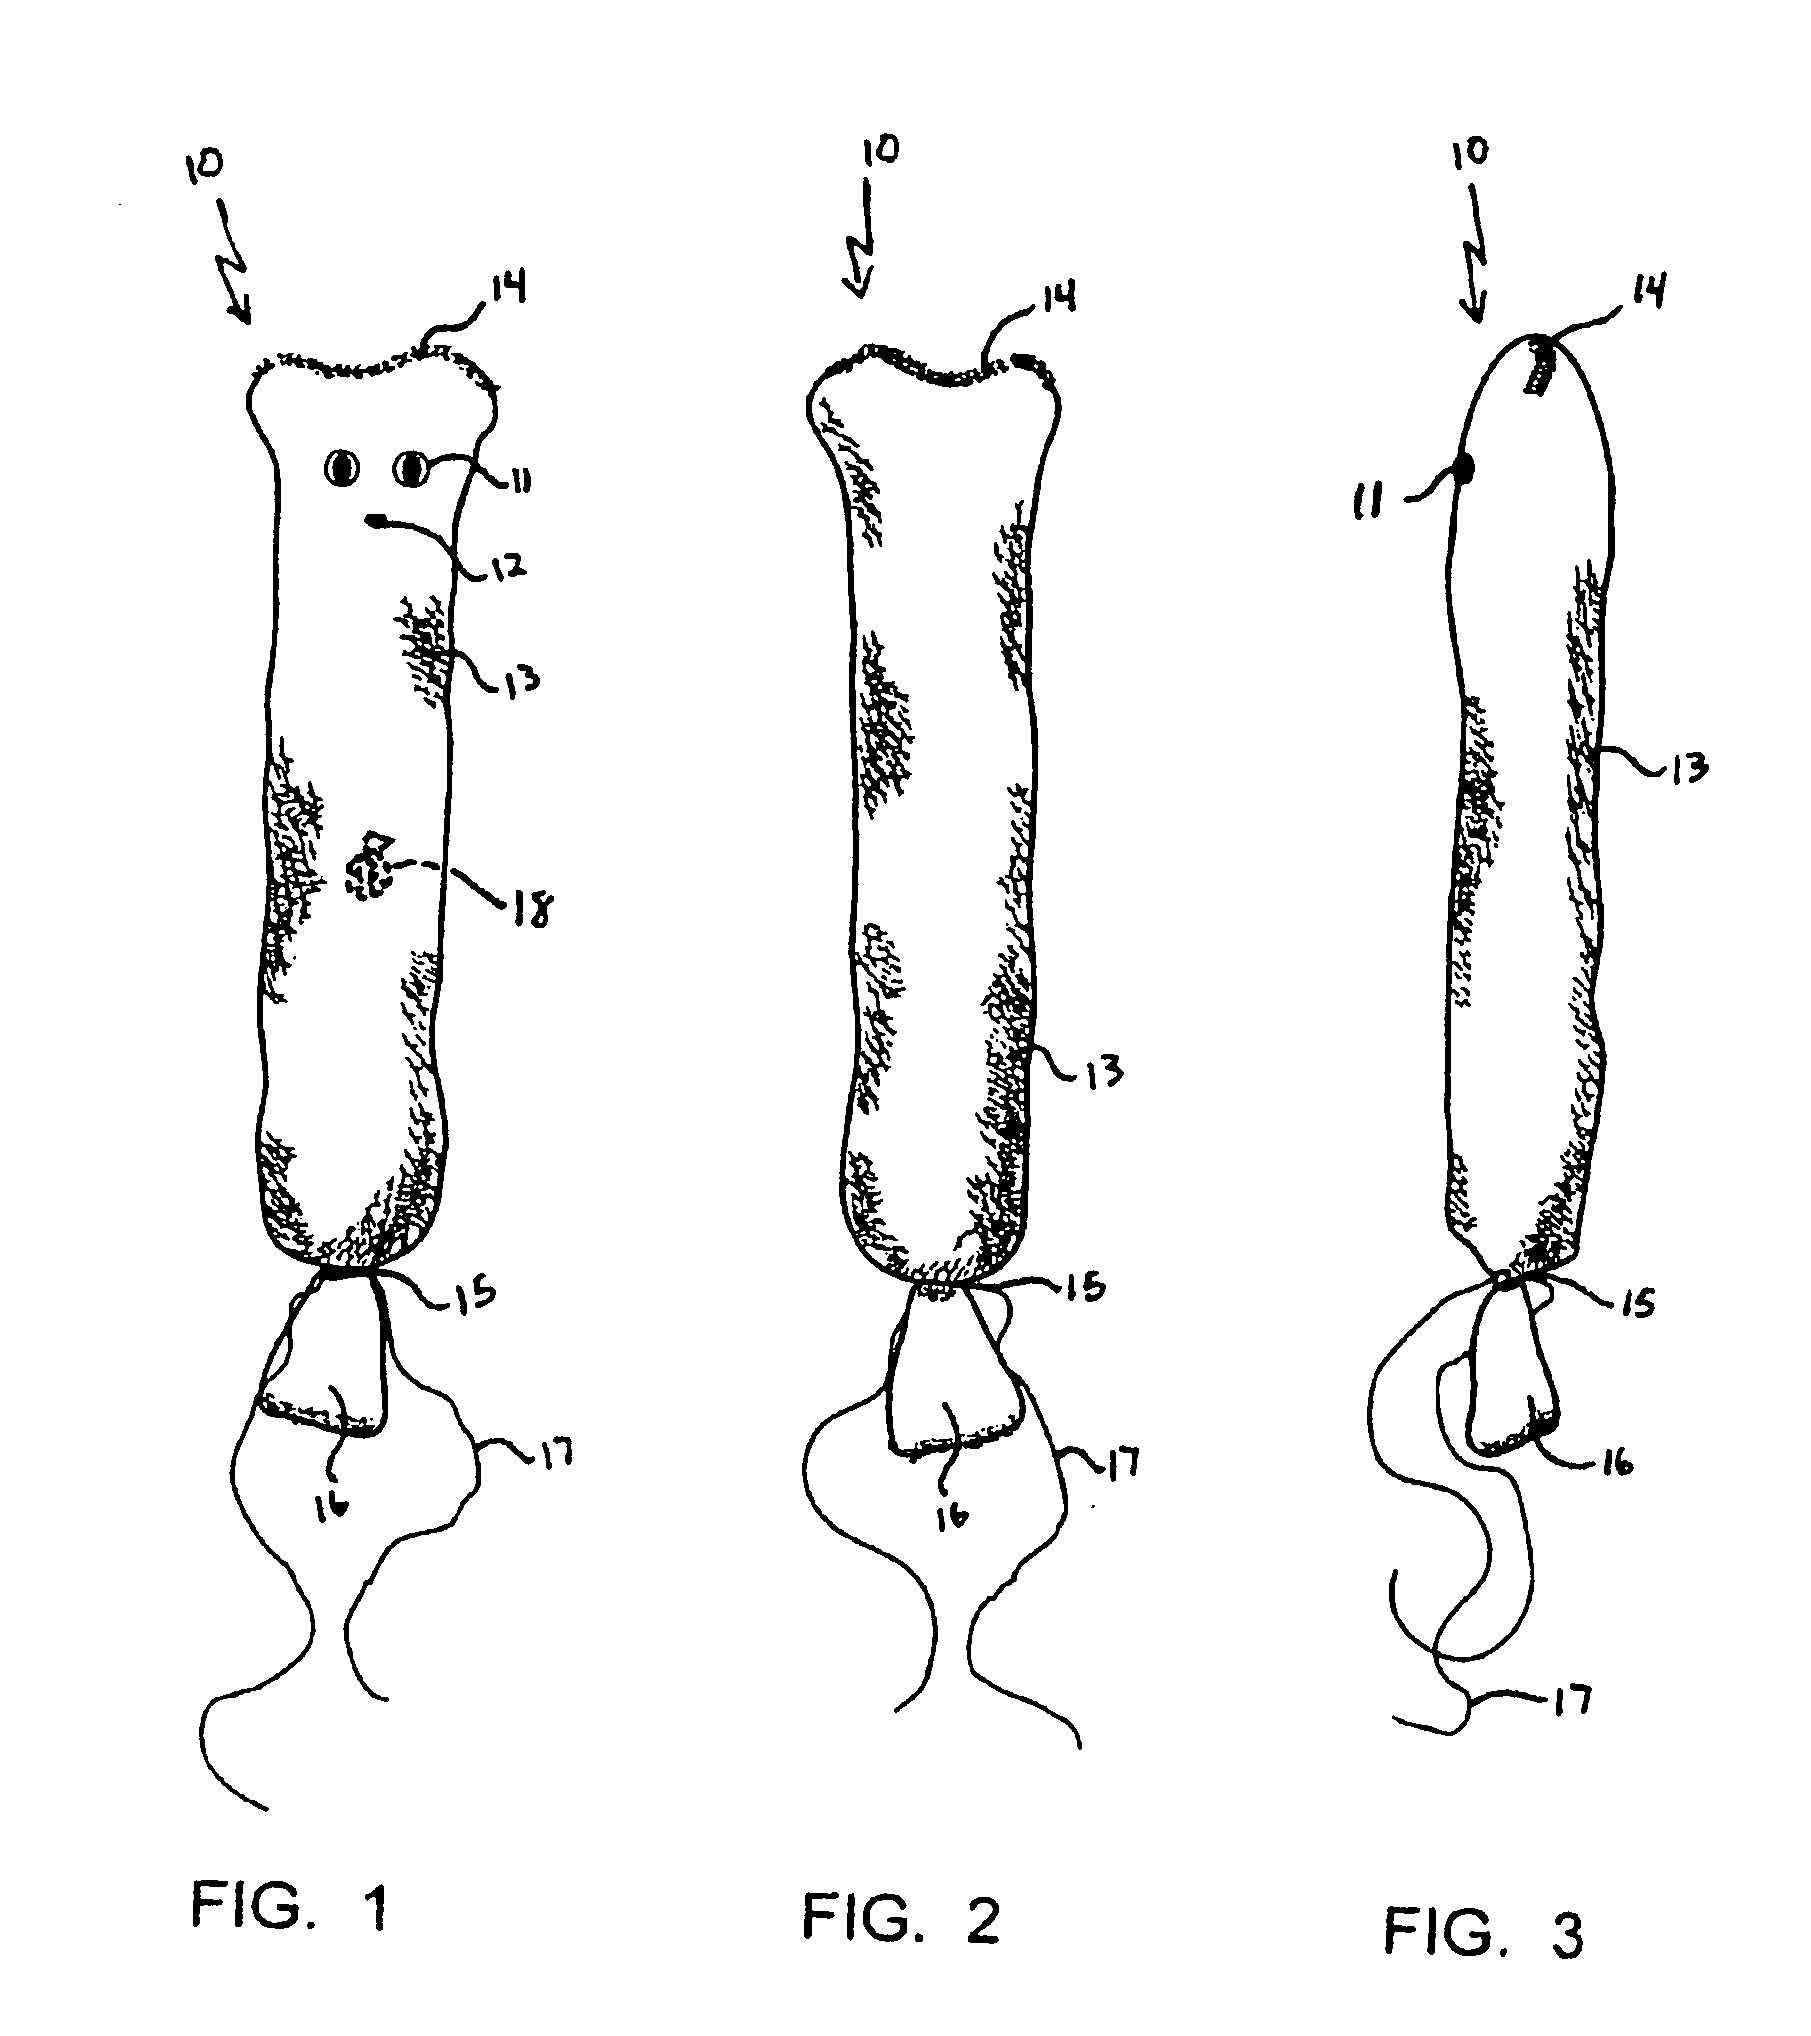 Pet toy made of looped material containing catnip and a noise maker